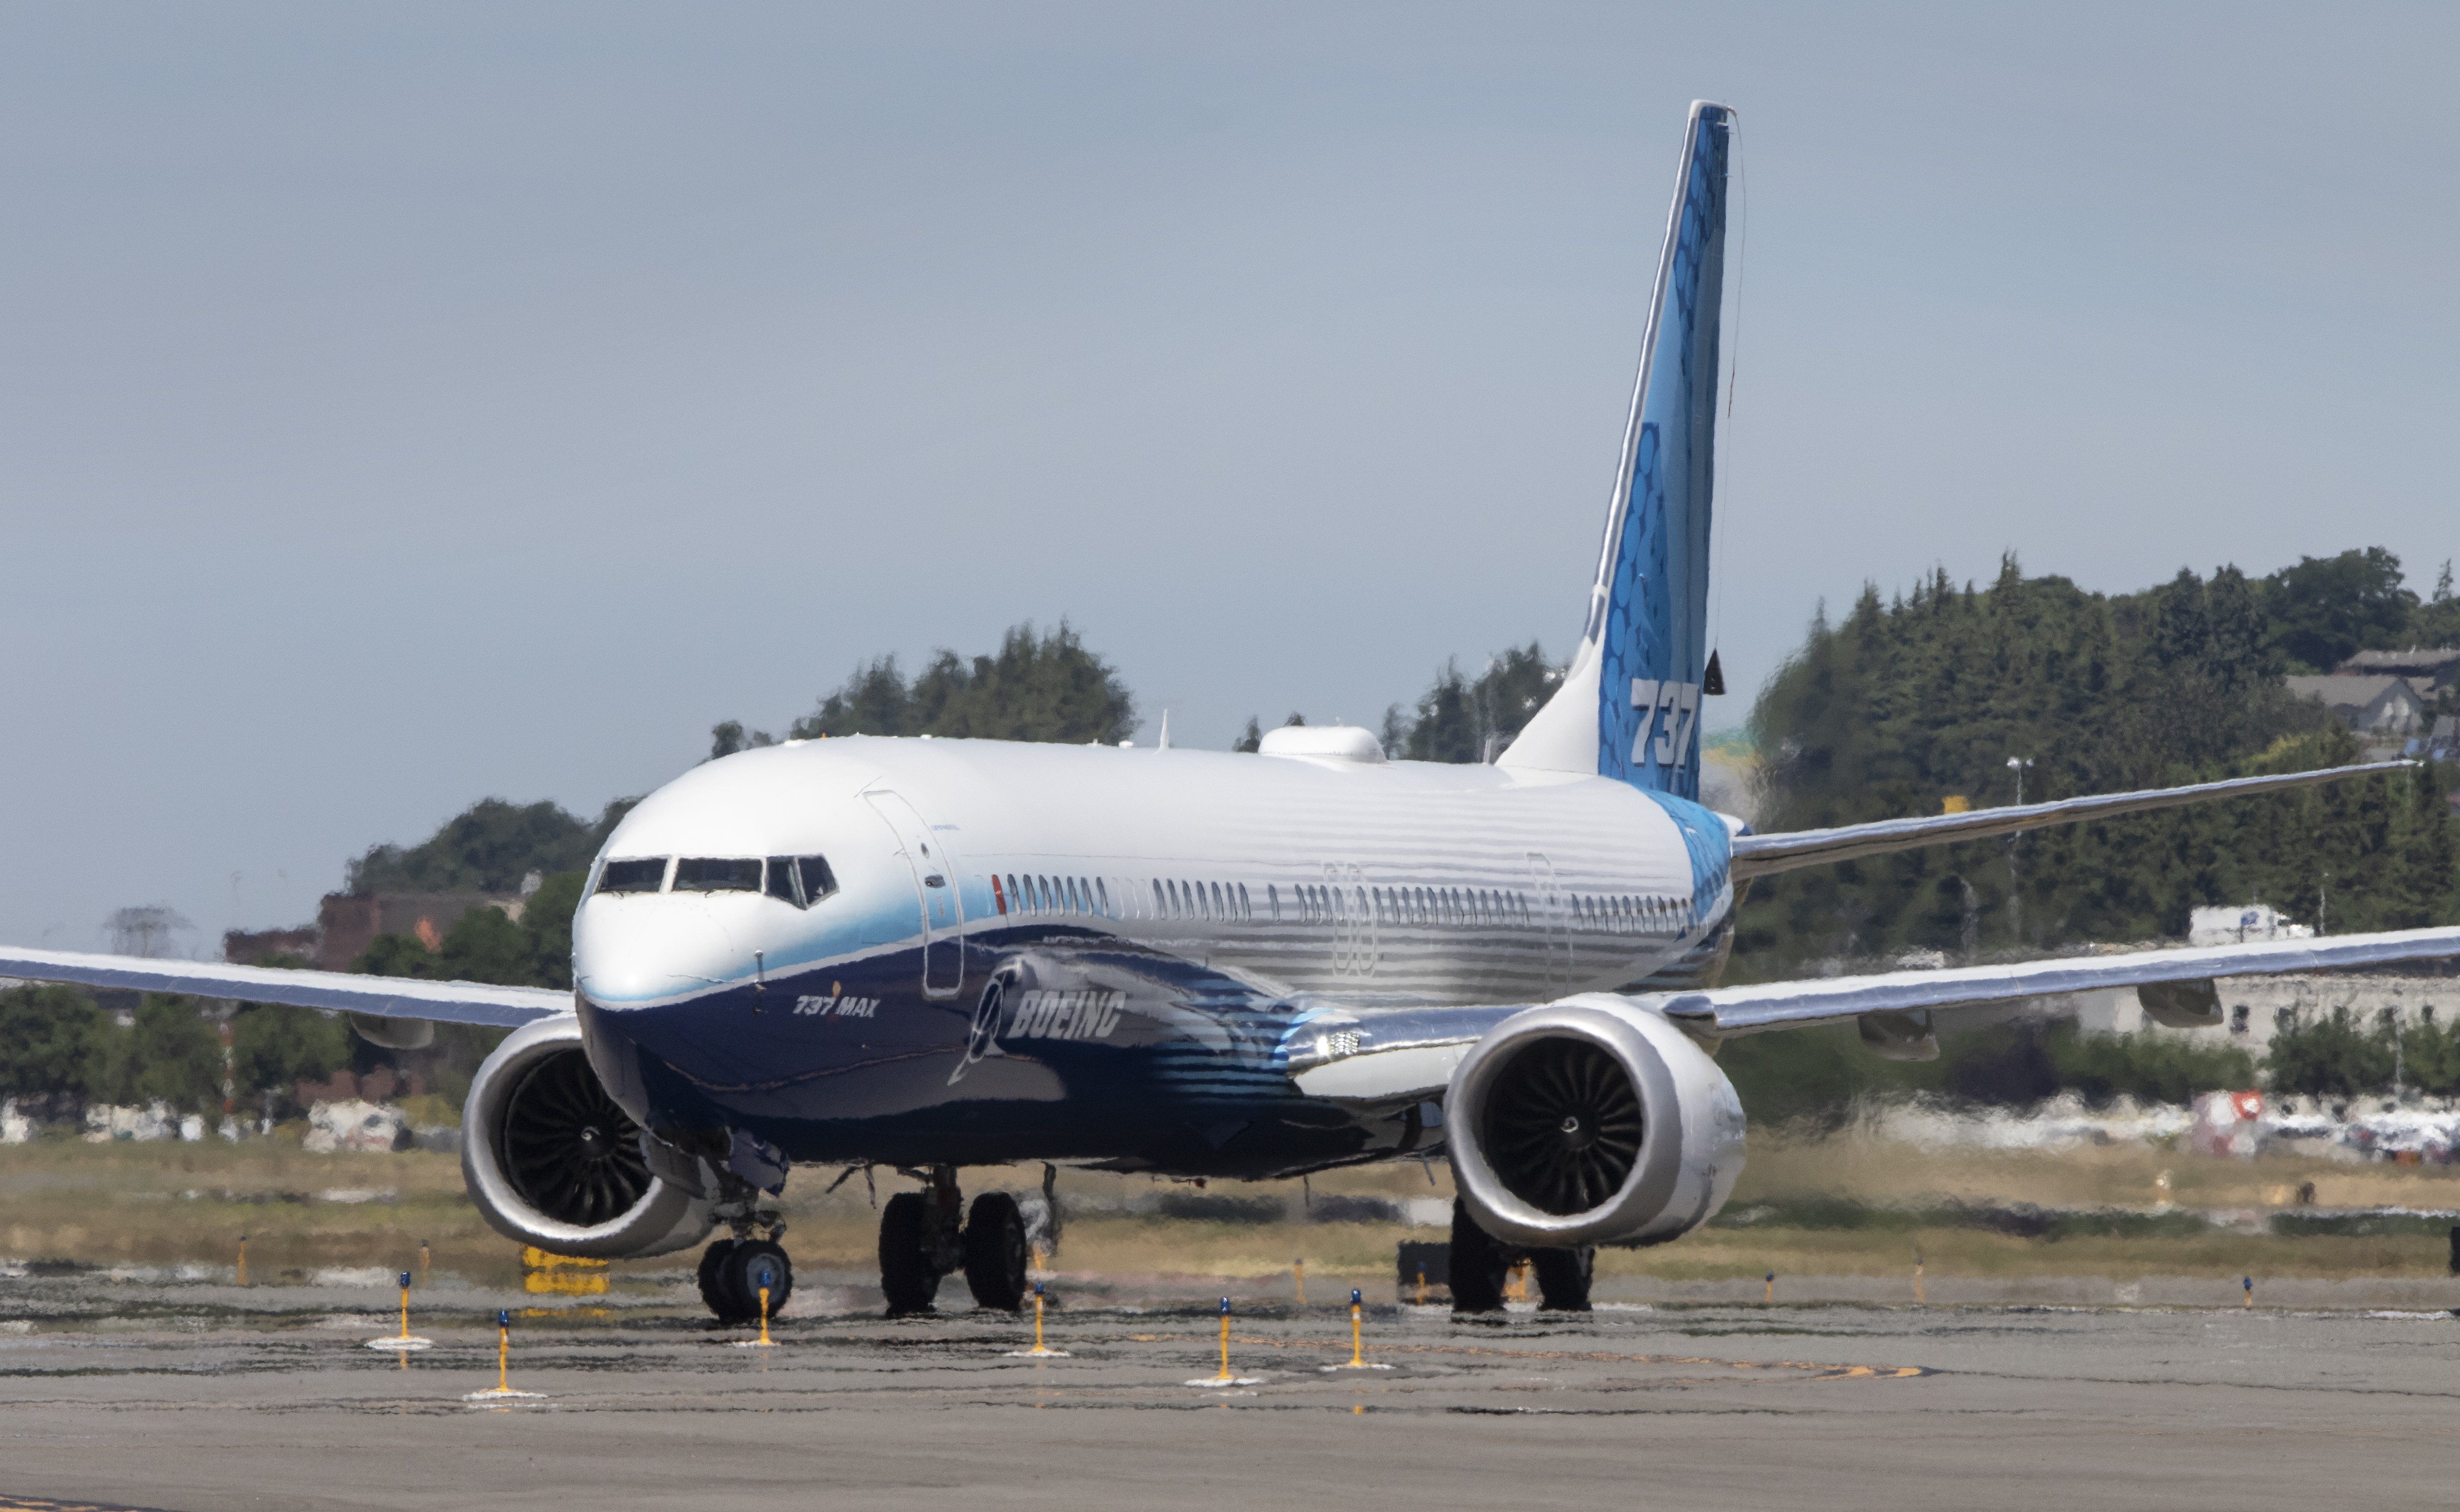 A Boeing 737 MAX 10 airliner taxis at Boeing Field after its first flight on June 18, 2021 in Seattle, Washington.